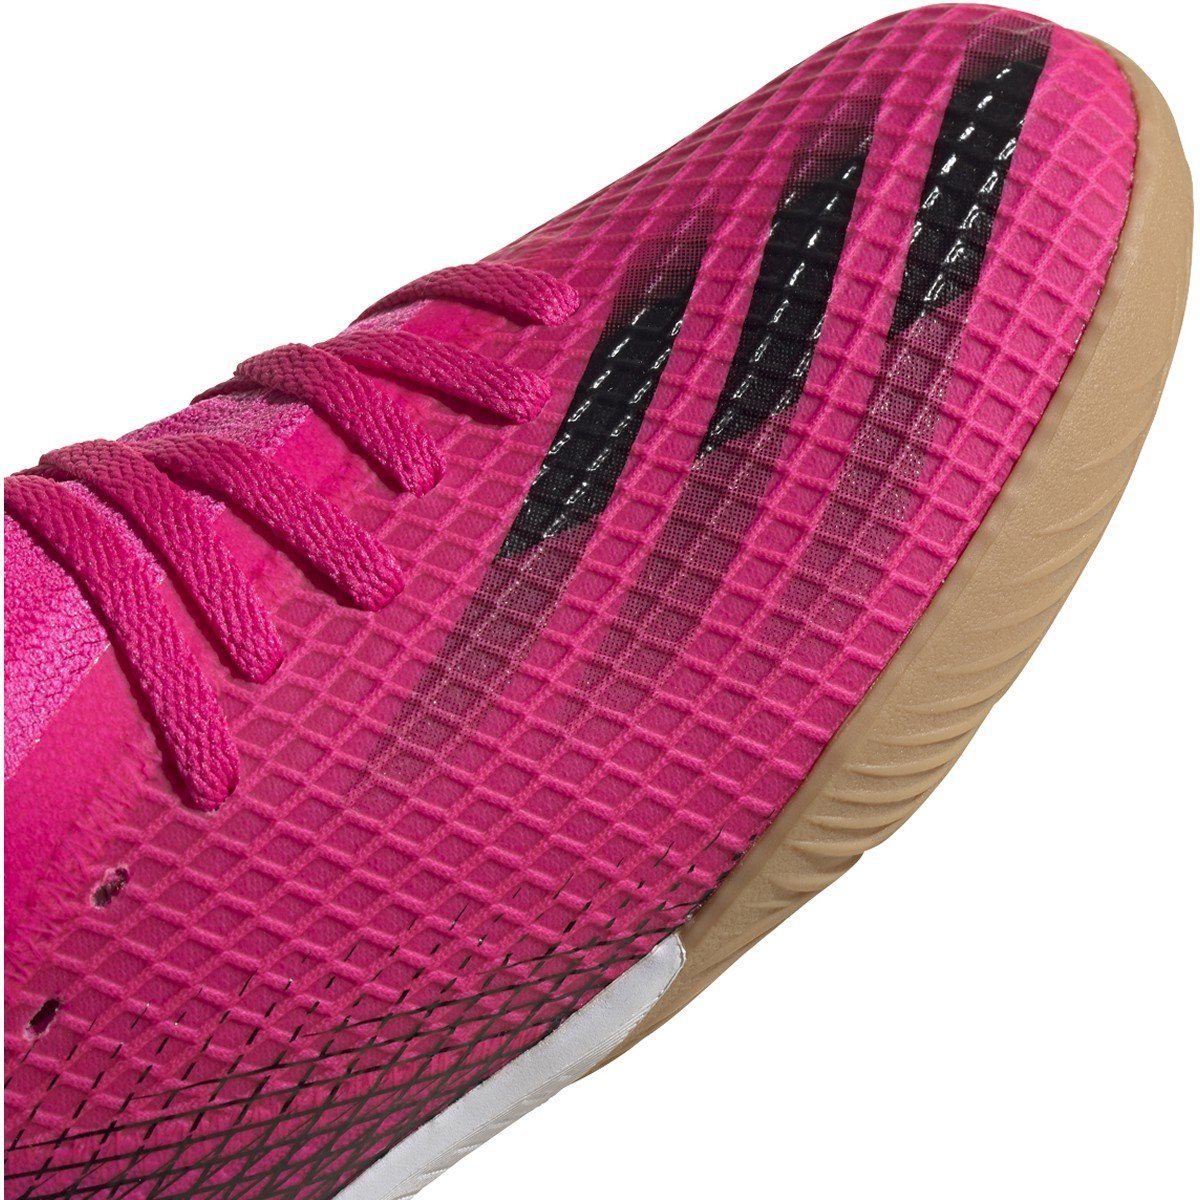 Adidas JR X Ghosted .3 IN - Pink-Black (Detail 1)